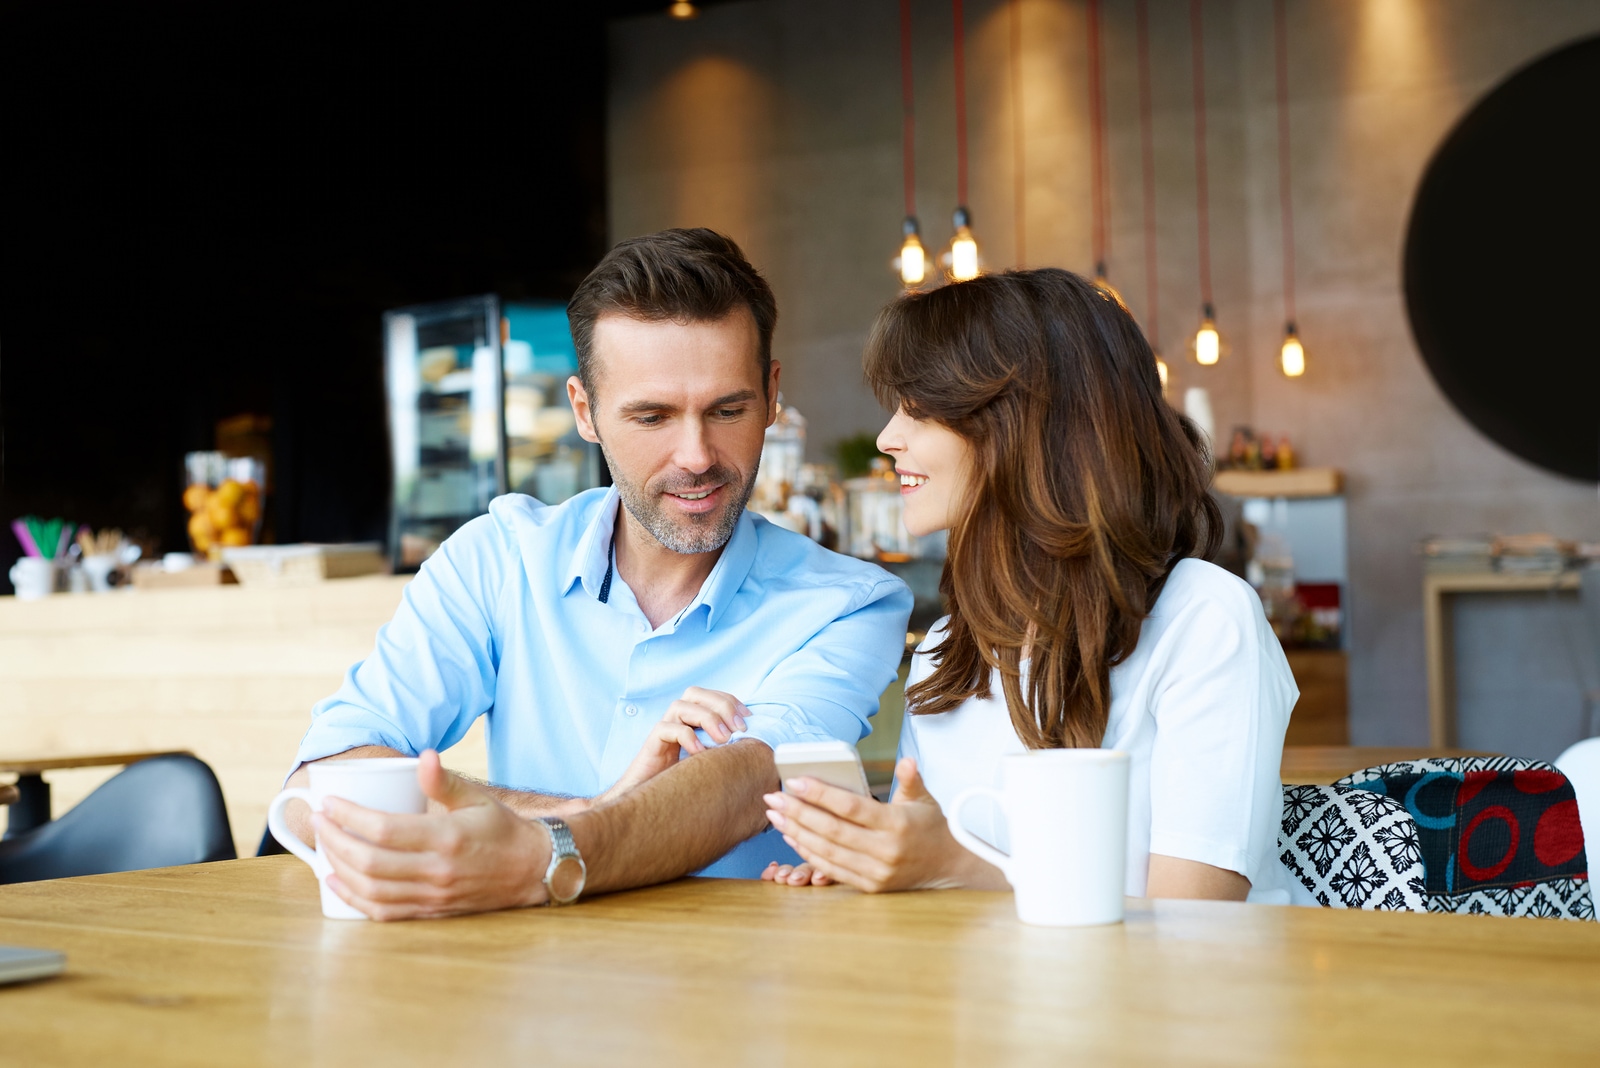 Couple at coffee shop spending time together